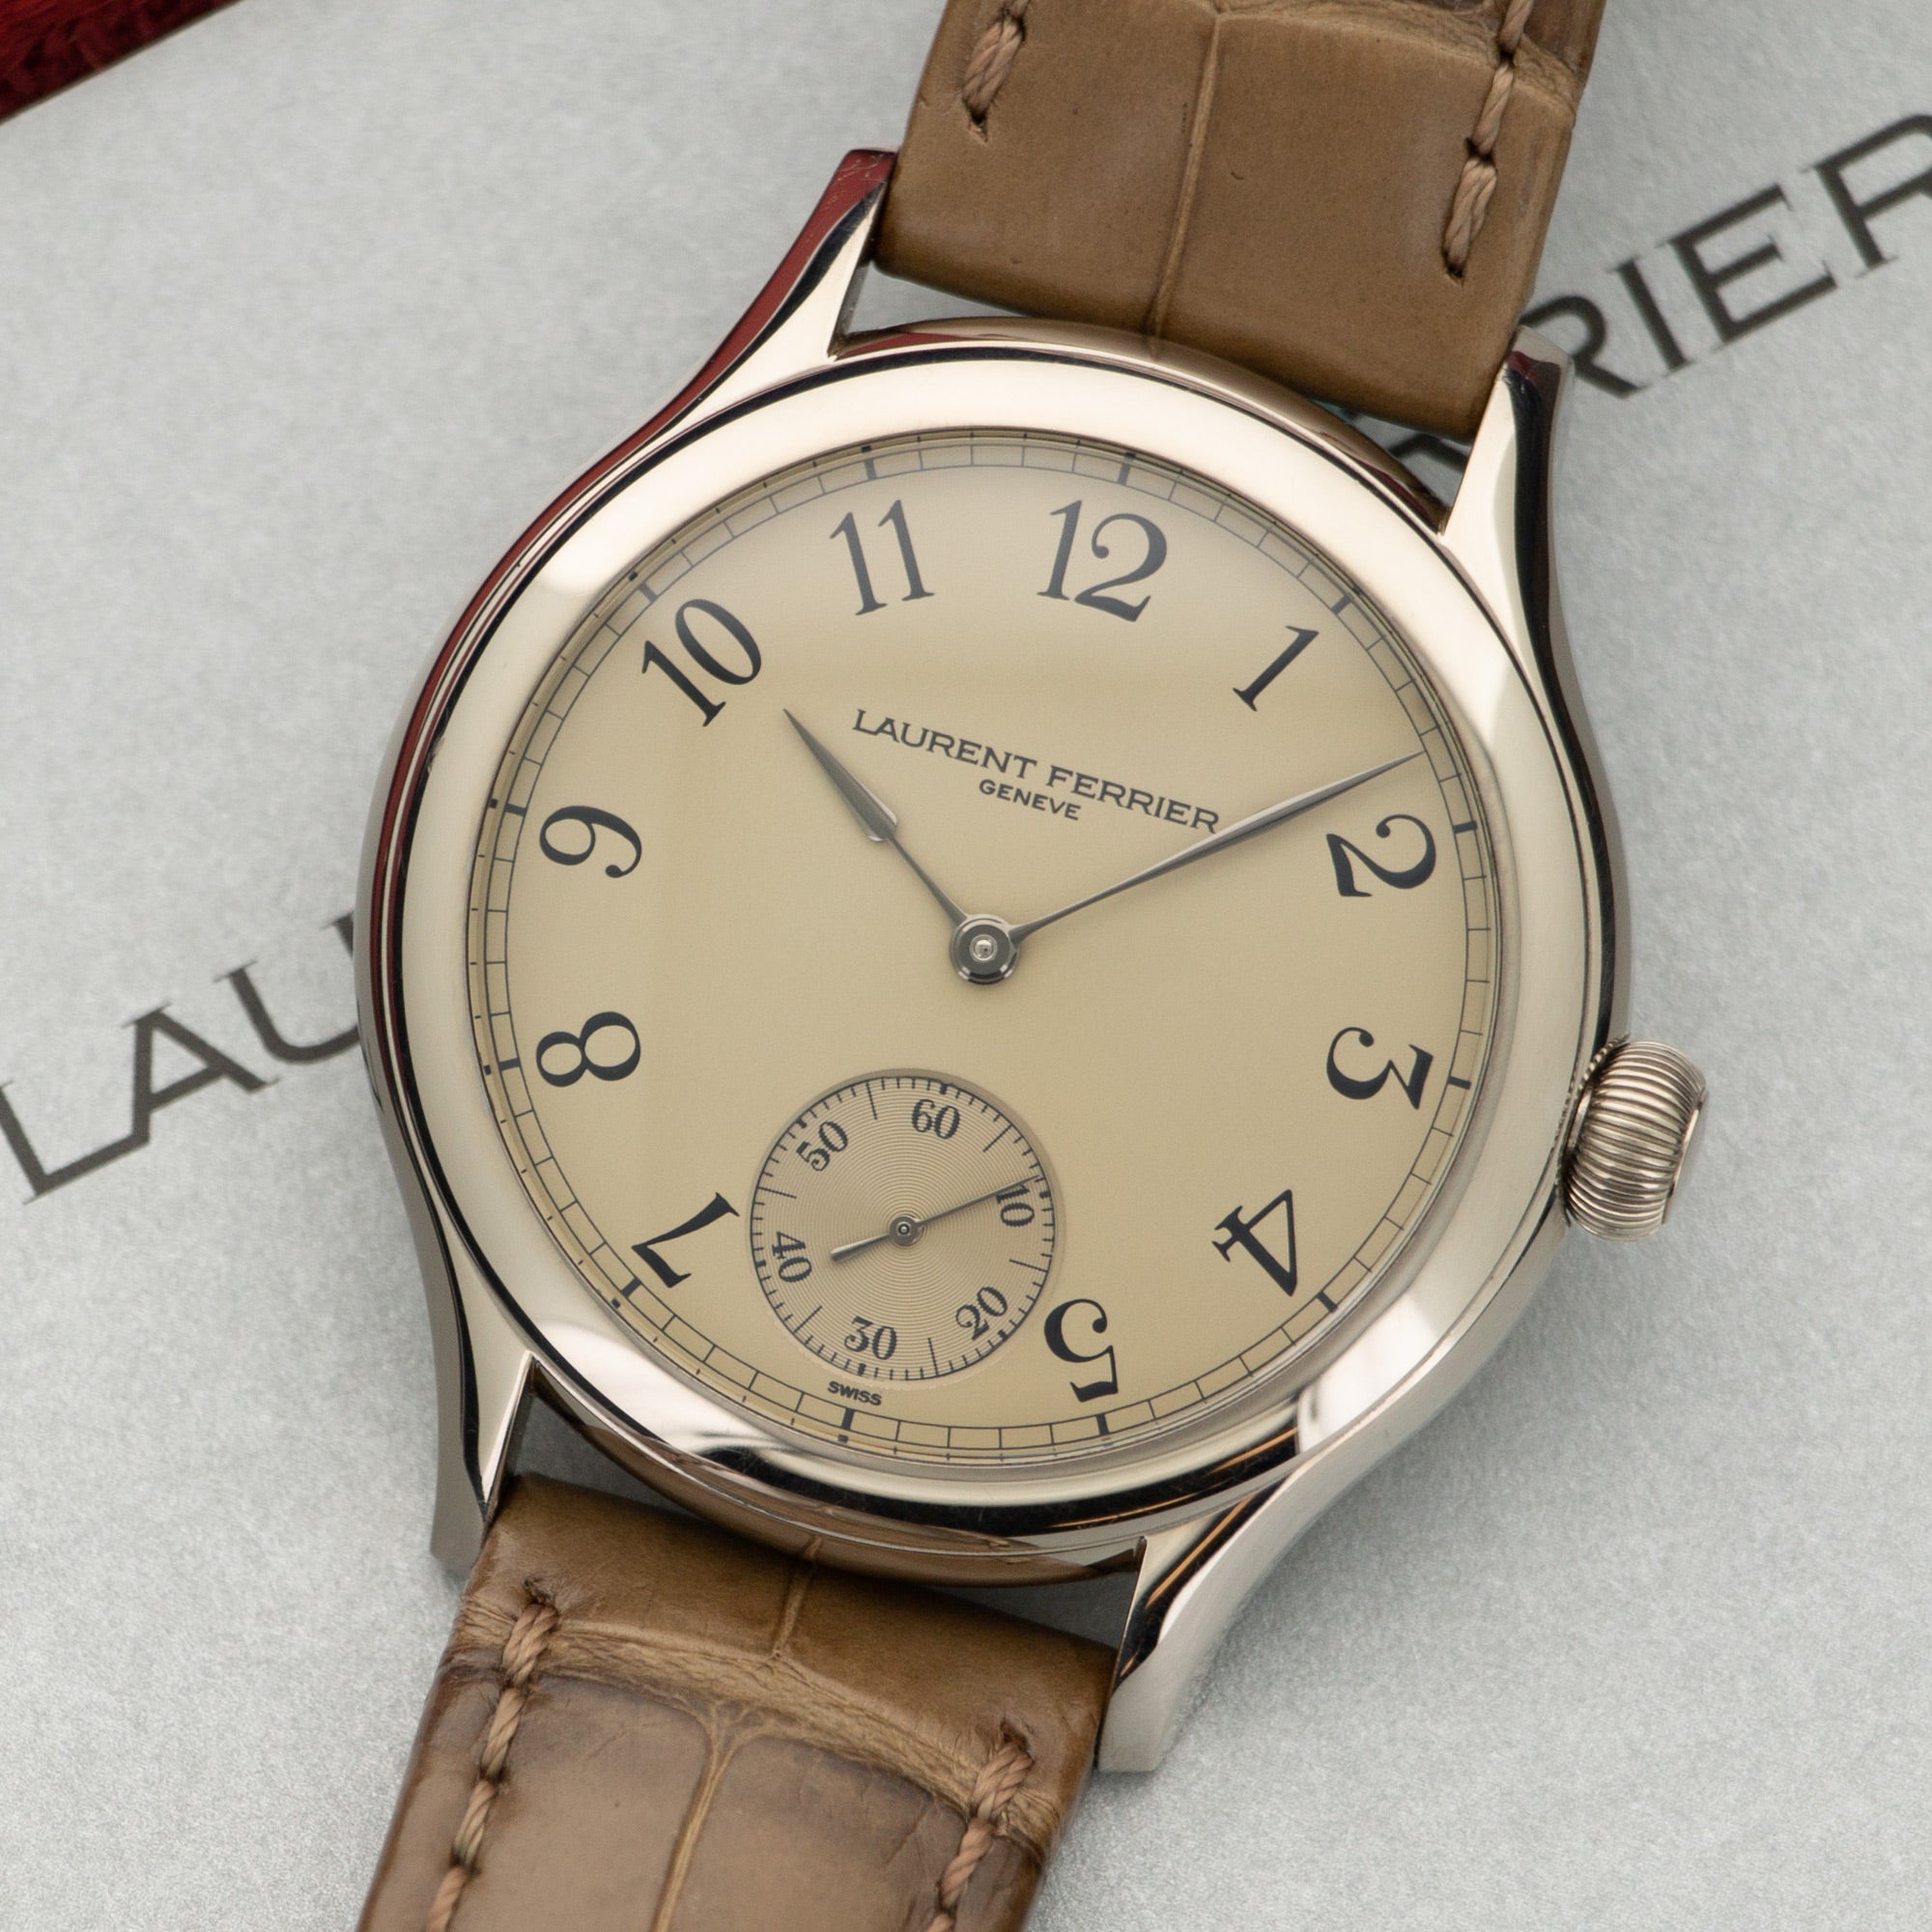 Laurent Ferrier - Laurent Ferrier White Gold Galet Micro-Rotor Watch Ref. FBN229.01 - The Keystone Watches